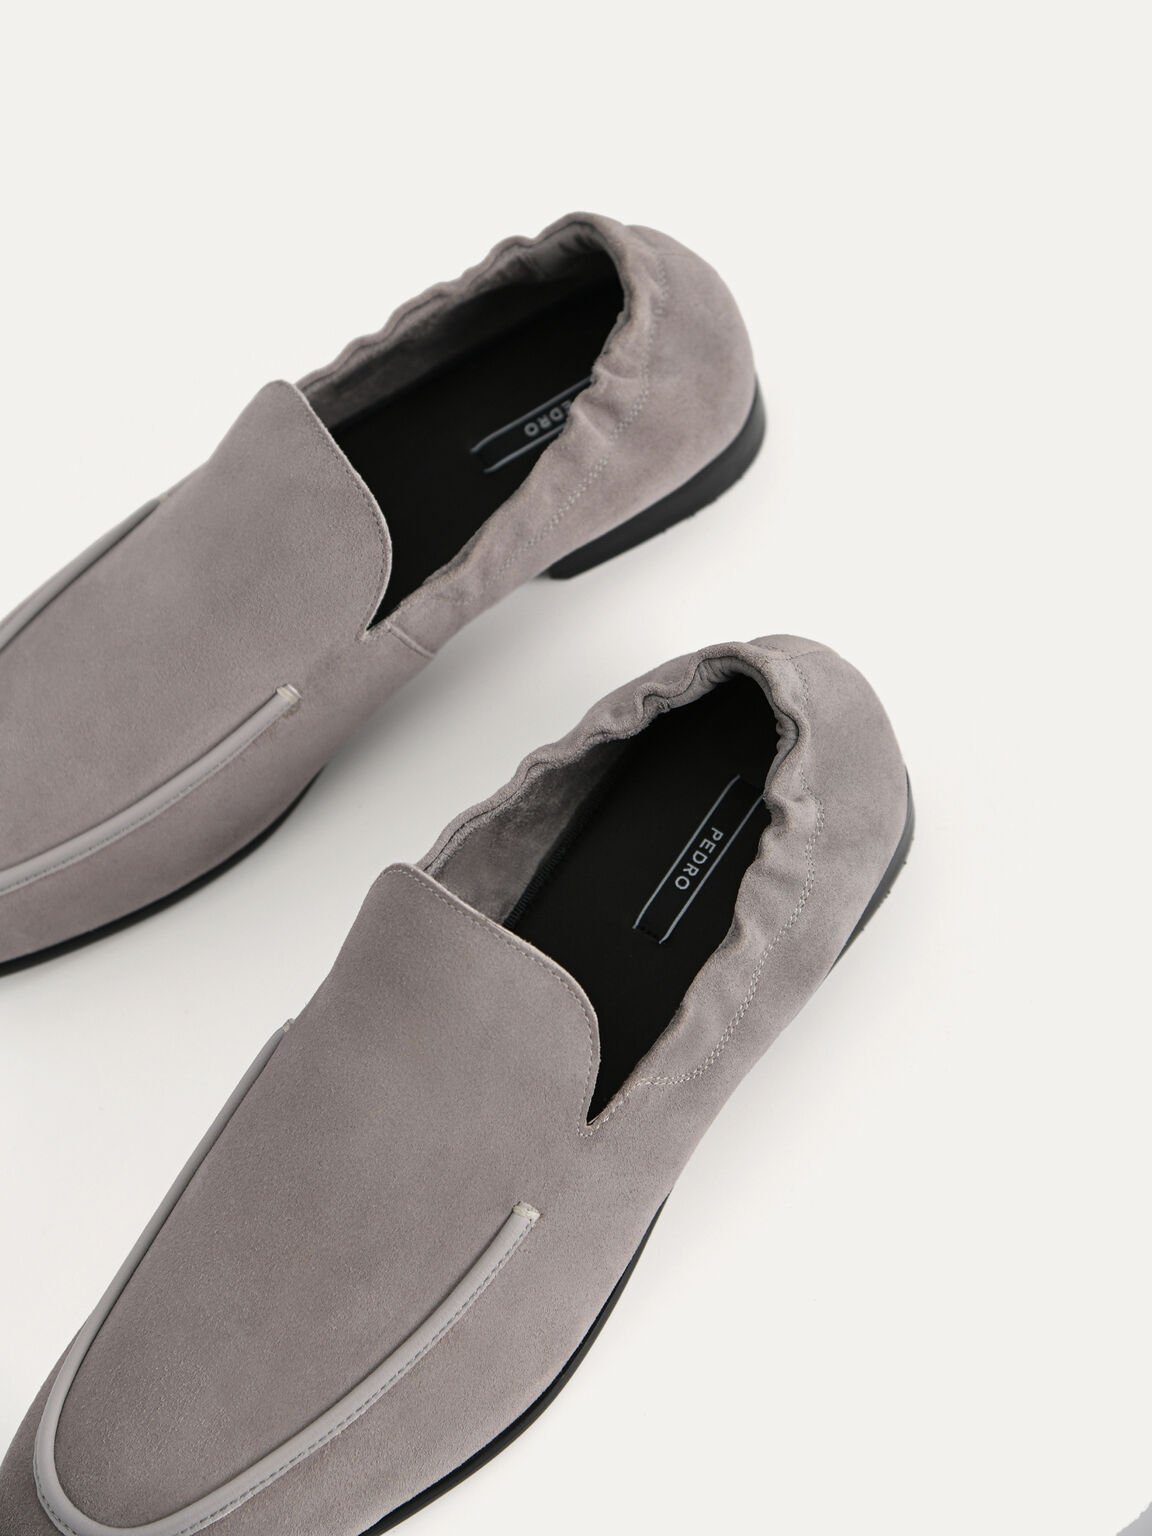 Suede Loafers, Light Grey